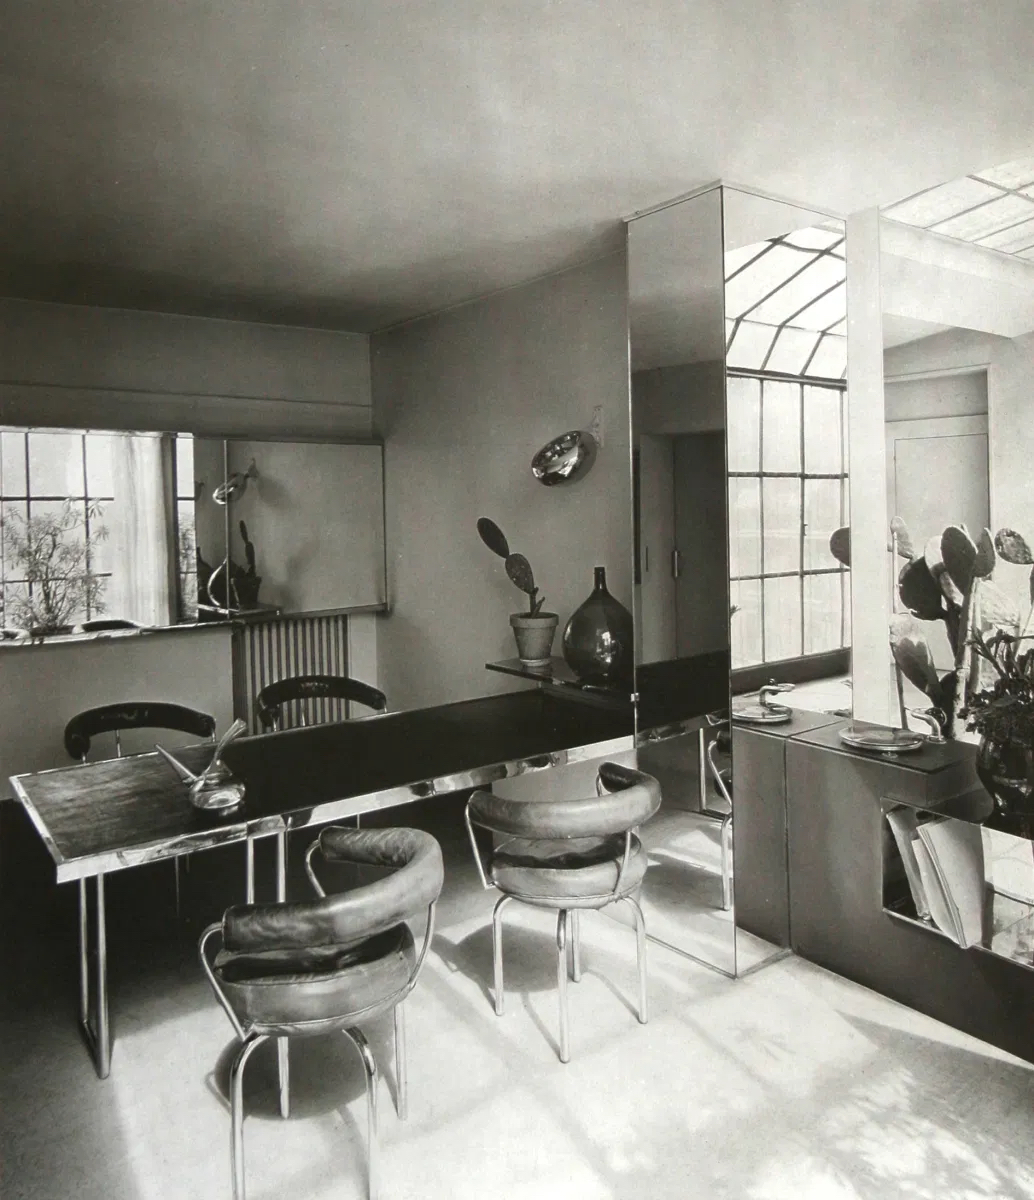 Charlotte Perriand Furniture: The Life and Work of an Iconic